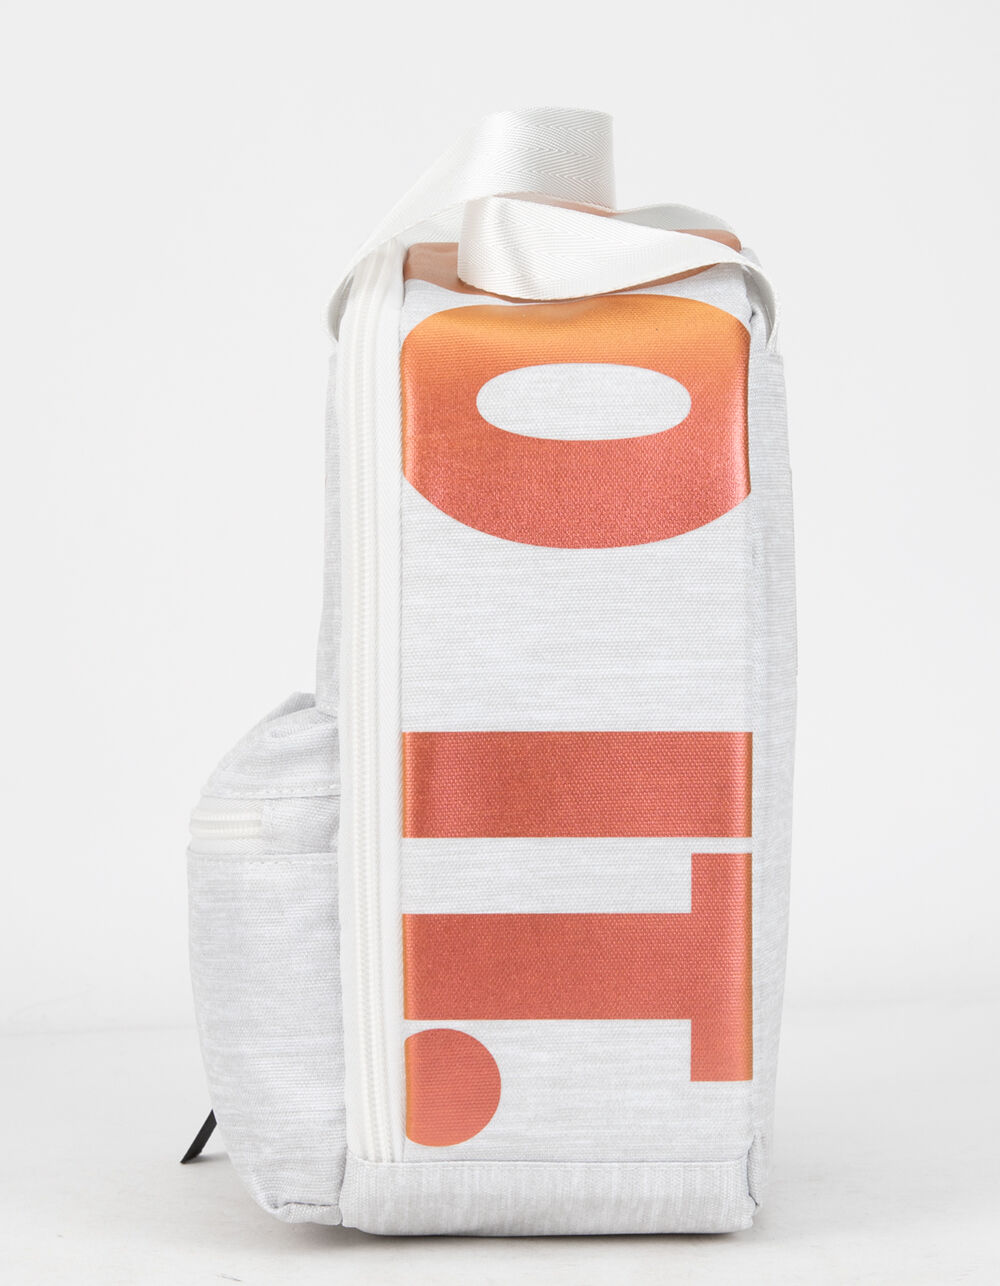 Nike Just Do It Bumper Sticker Fuel Pack Insulated Lunch Bag